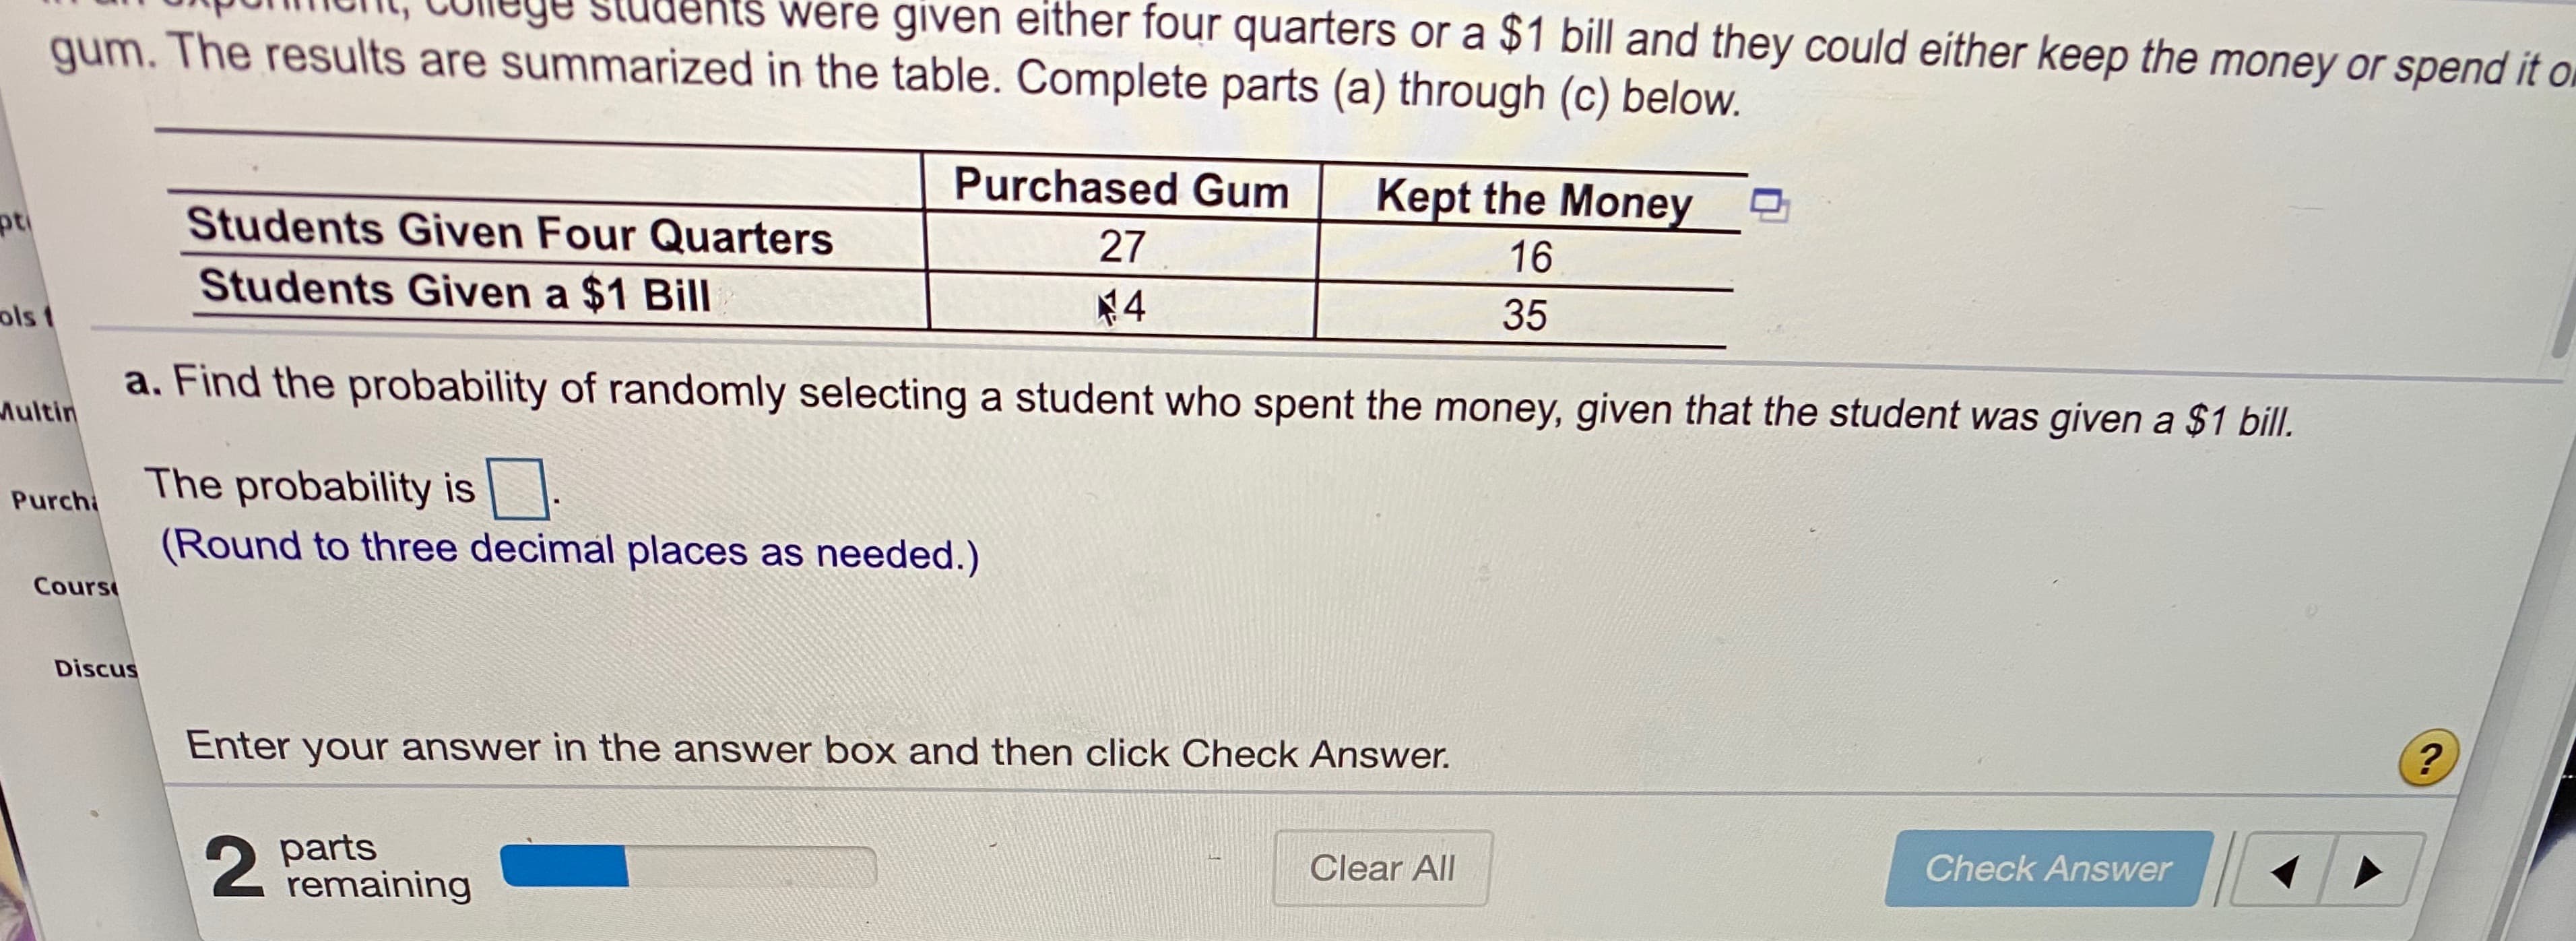 COlege studeniS were given either four quarters or a $1 bill and they could either keep the money or spend it o
gum. The results are summarized in the table. Complete parts (a) through (c) below.
Purchased Gum
Kept the Money
Students Given Four Quarters
27
16
Students Given a $1 Bill
ols 1
¥4
35
a. Find the probability of randomly selecting a student who spent the money, given that the student was given a $1 bill.
Aultin
The probability is|
(Round to three decimal places as needed.)
Purch
Cours
Discus
Enter your answer in the answer box and then click Check Answer.
2 parts
remaining
Clear All
Check Answer
